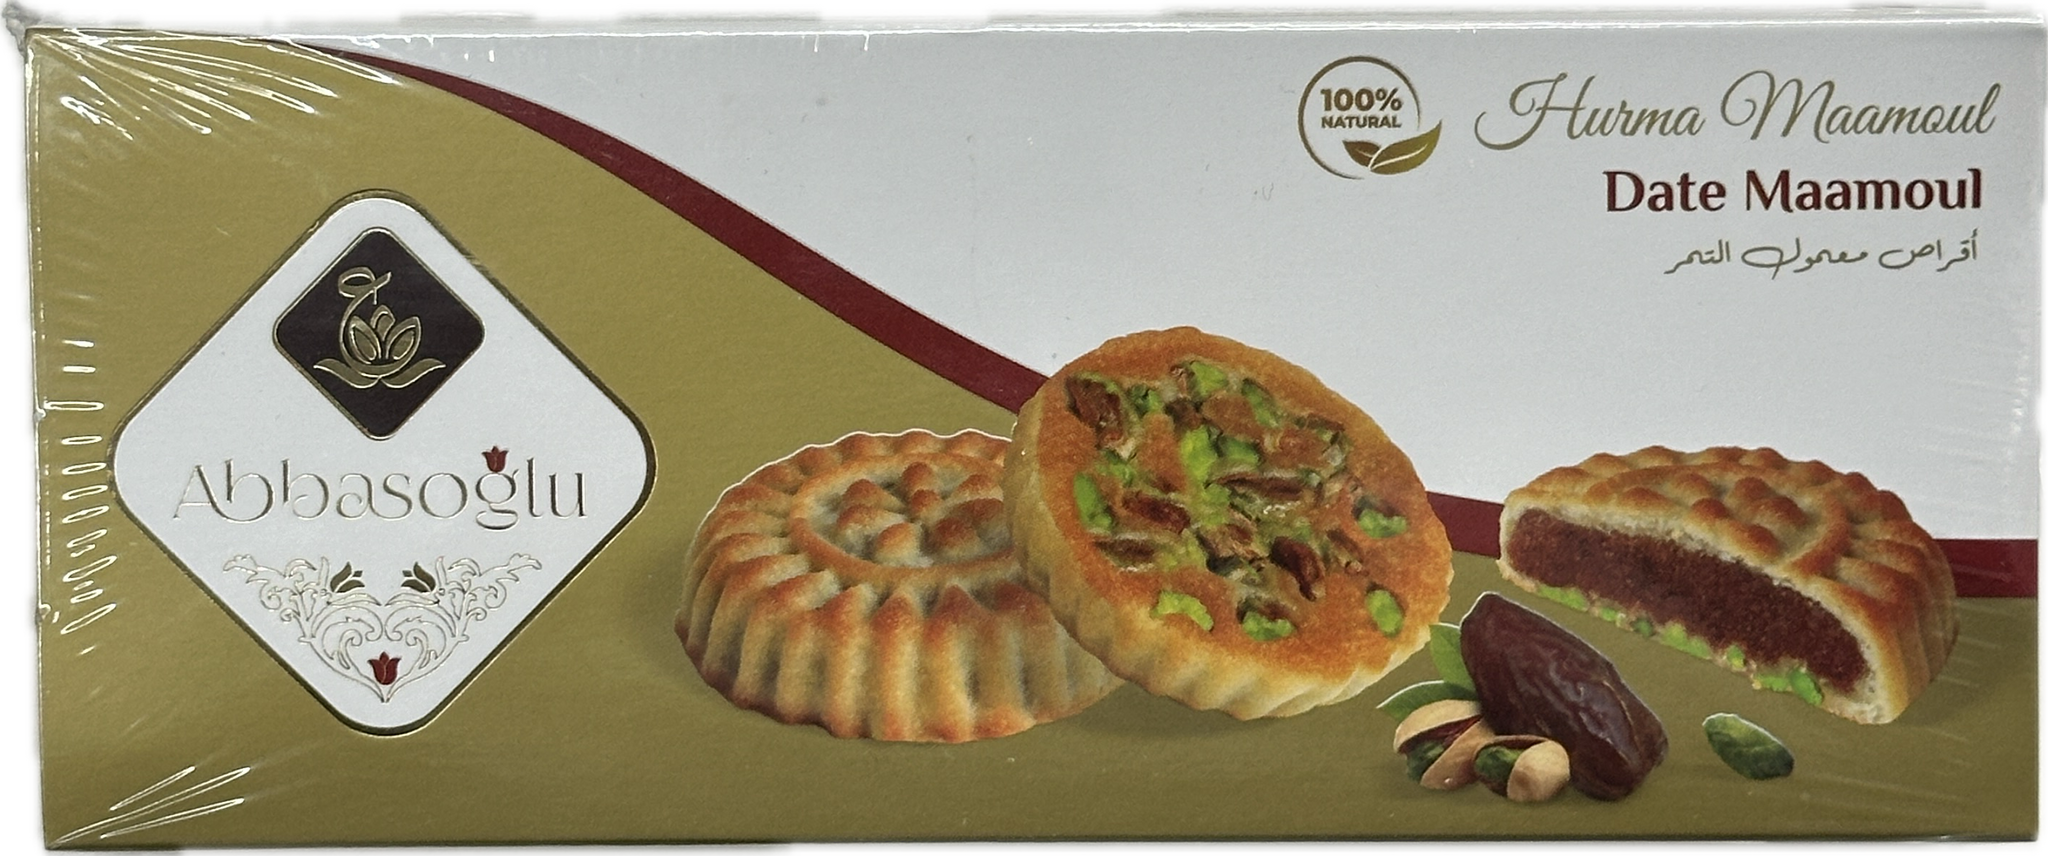 Abbas Oglu Mixed Baklava and Maamoul Cookies (Variety Pack or Individual 200g)